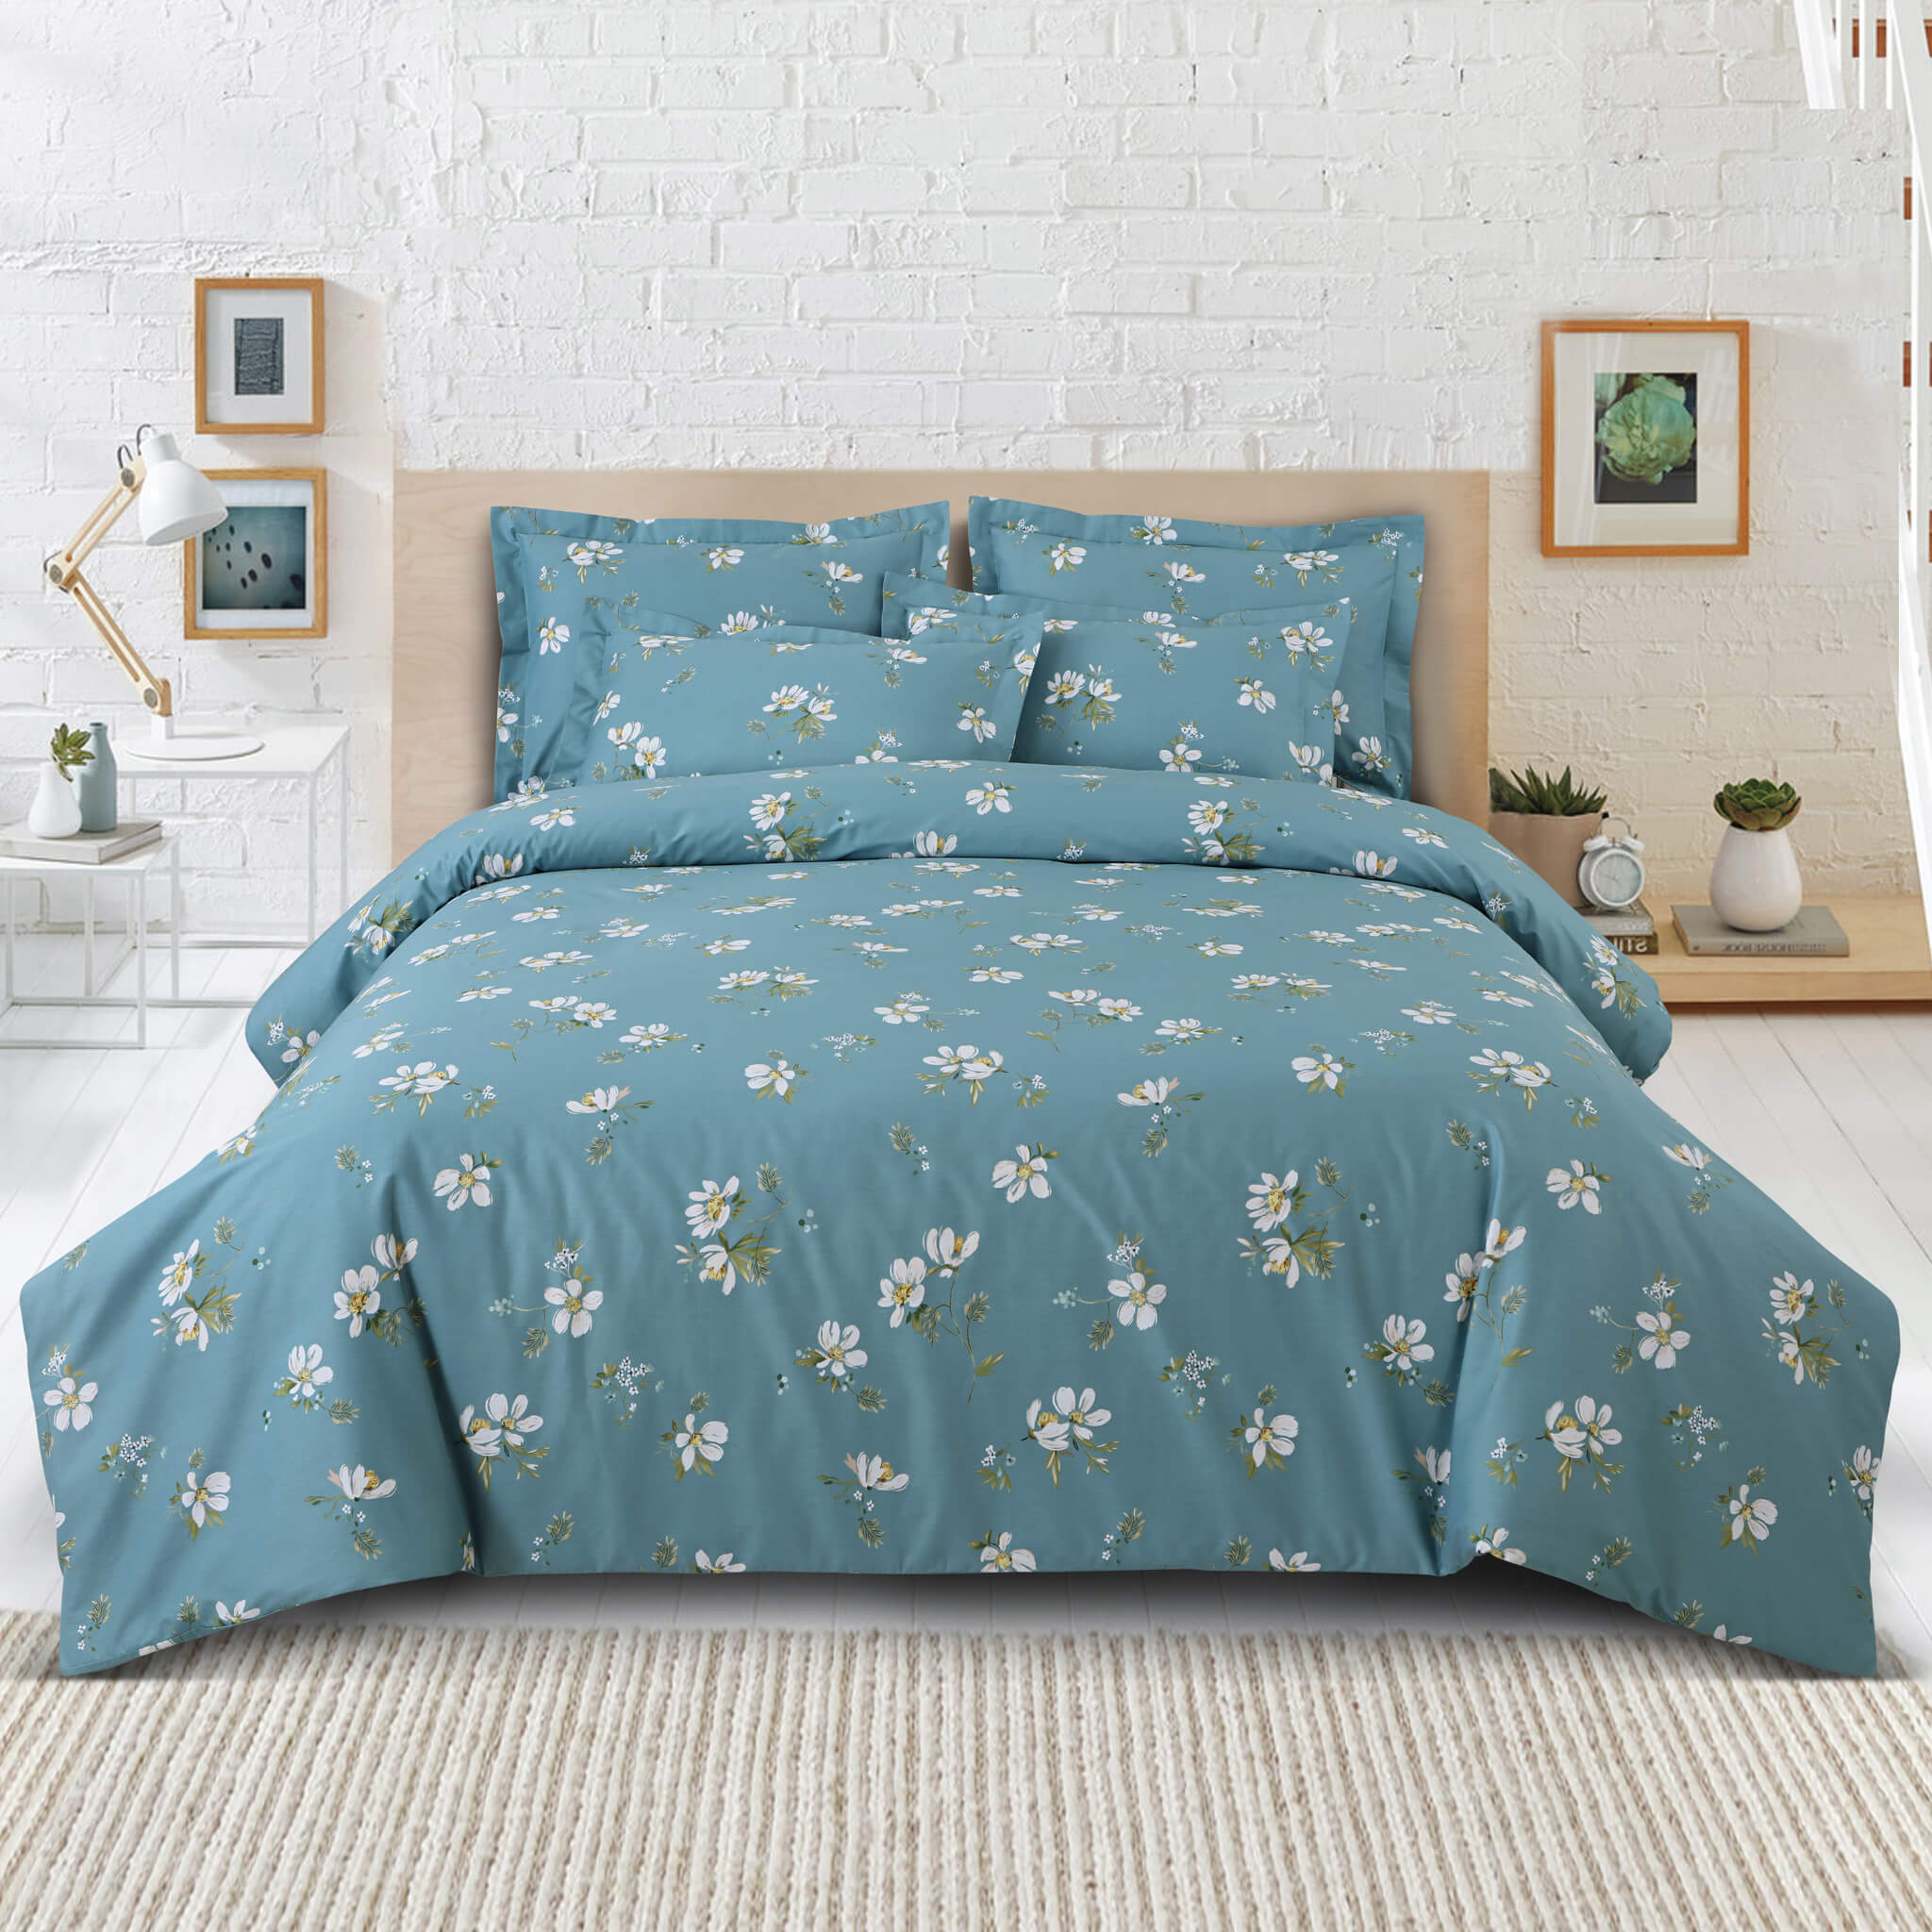 Malako Royale XL Green Floral 100% Cotton King Size Bed Sheet/Bedding Set -  B: 6 Piece Quilted Comforter Set